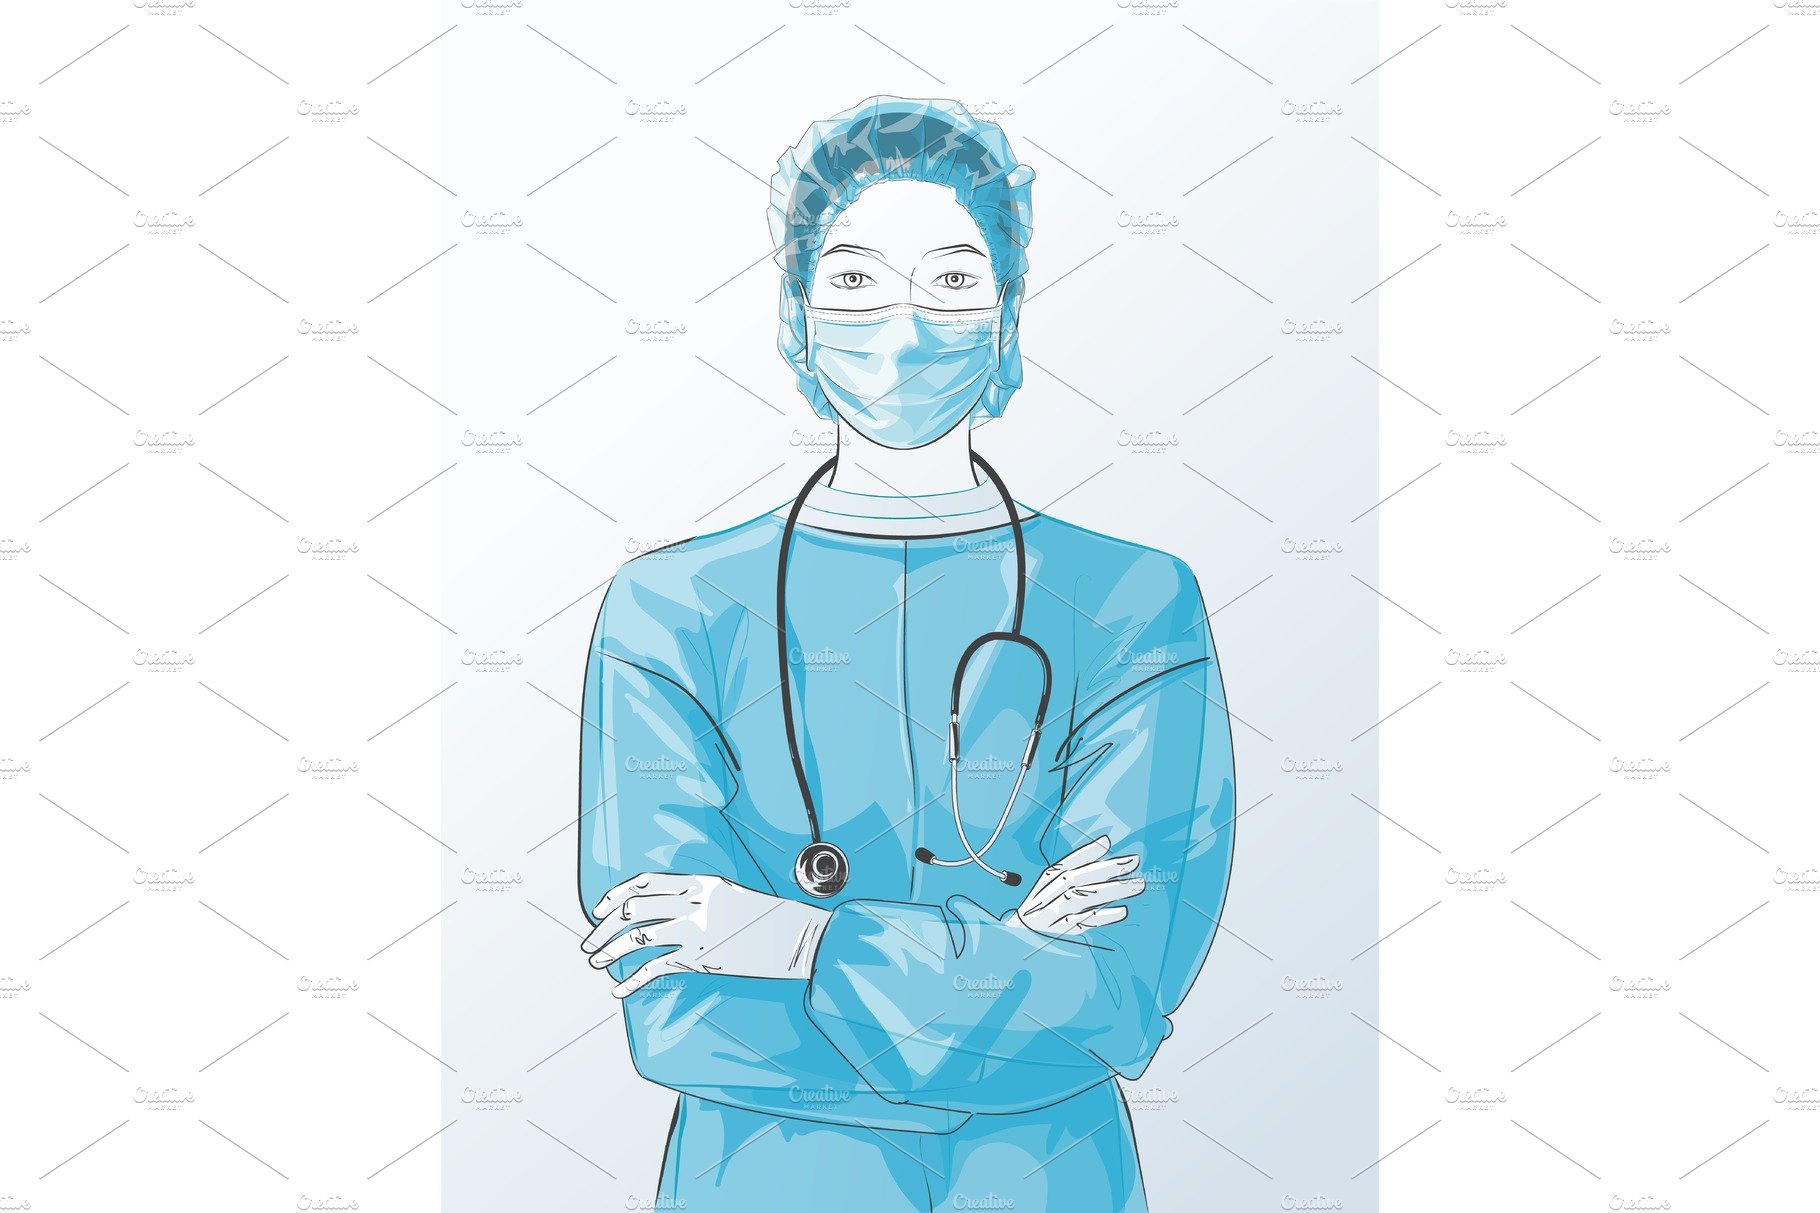 Portrait of Doctor with face mask cover image.